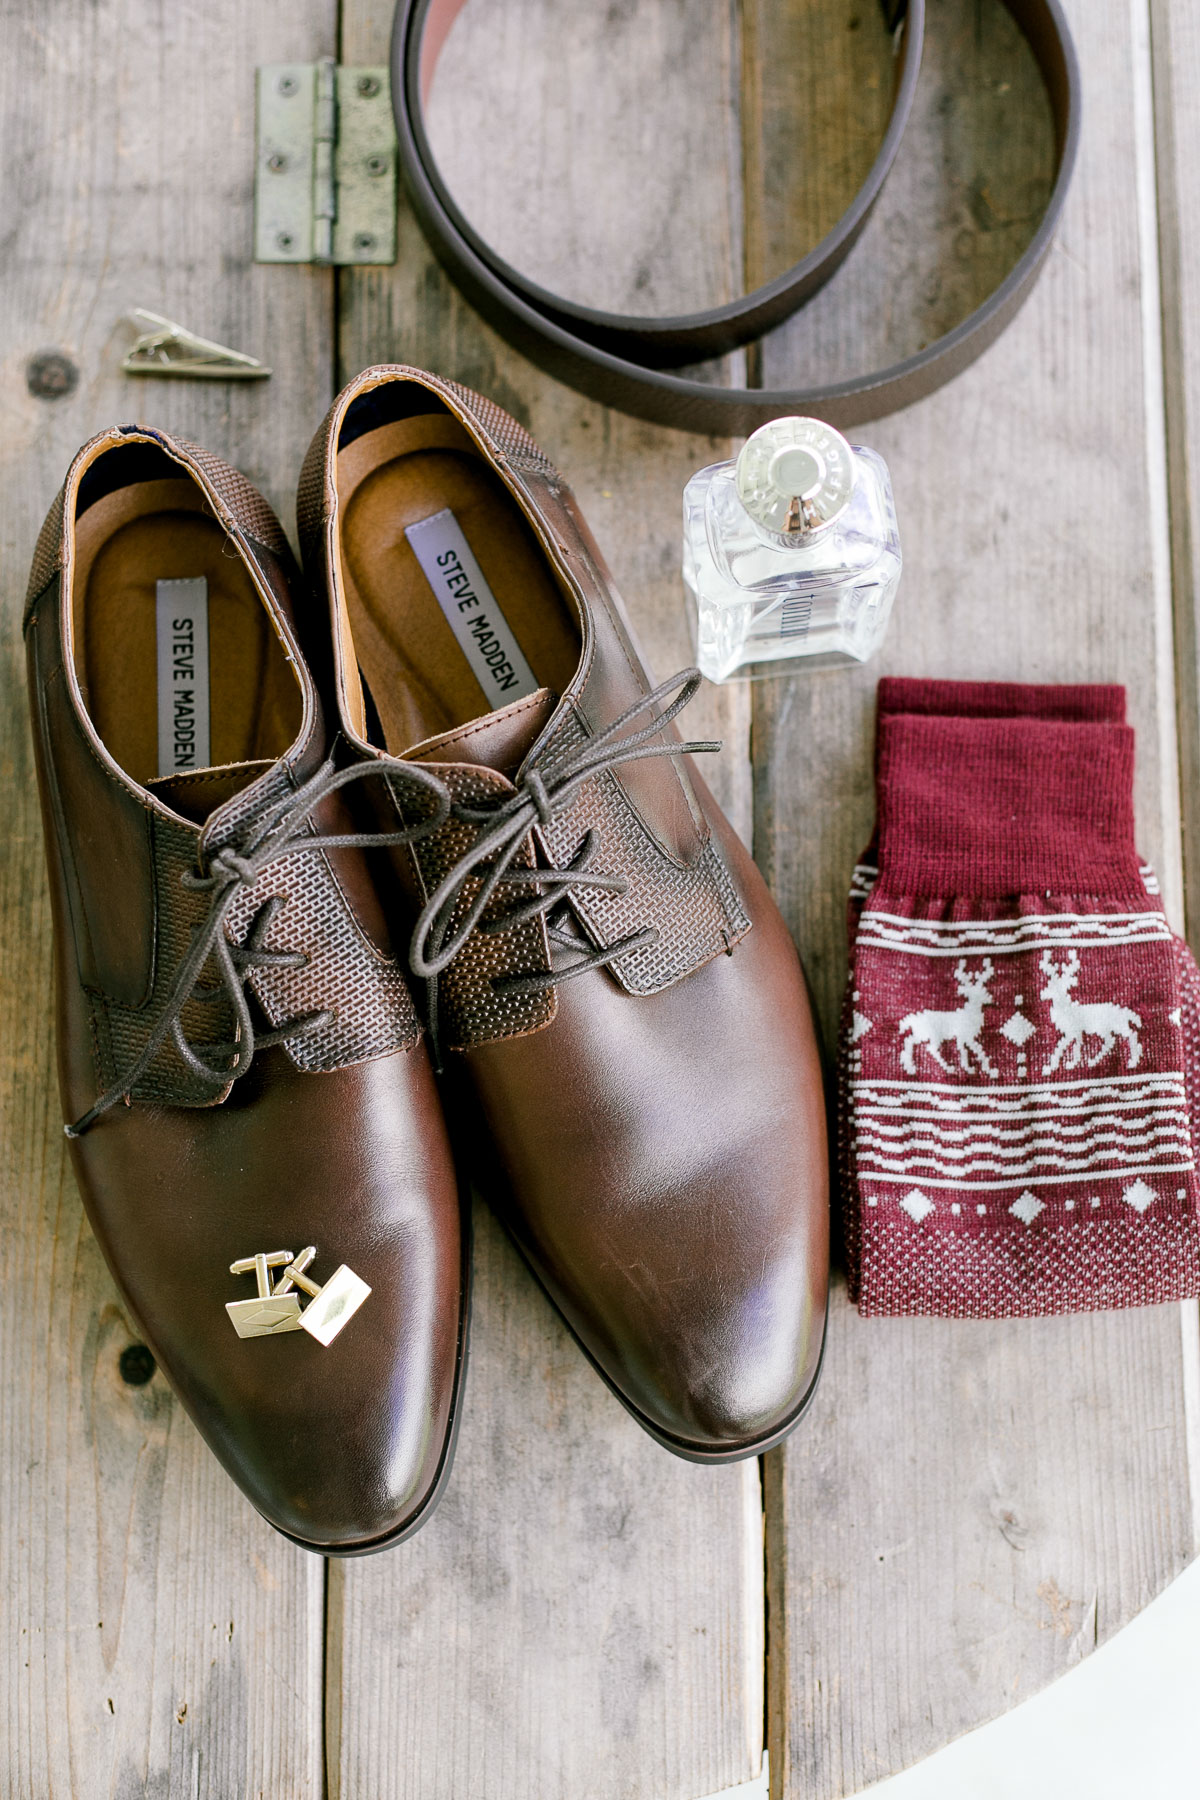 Steve Madden shoes and other groom details 